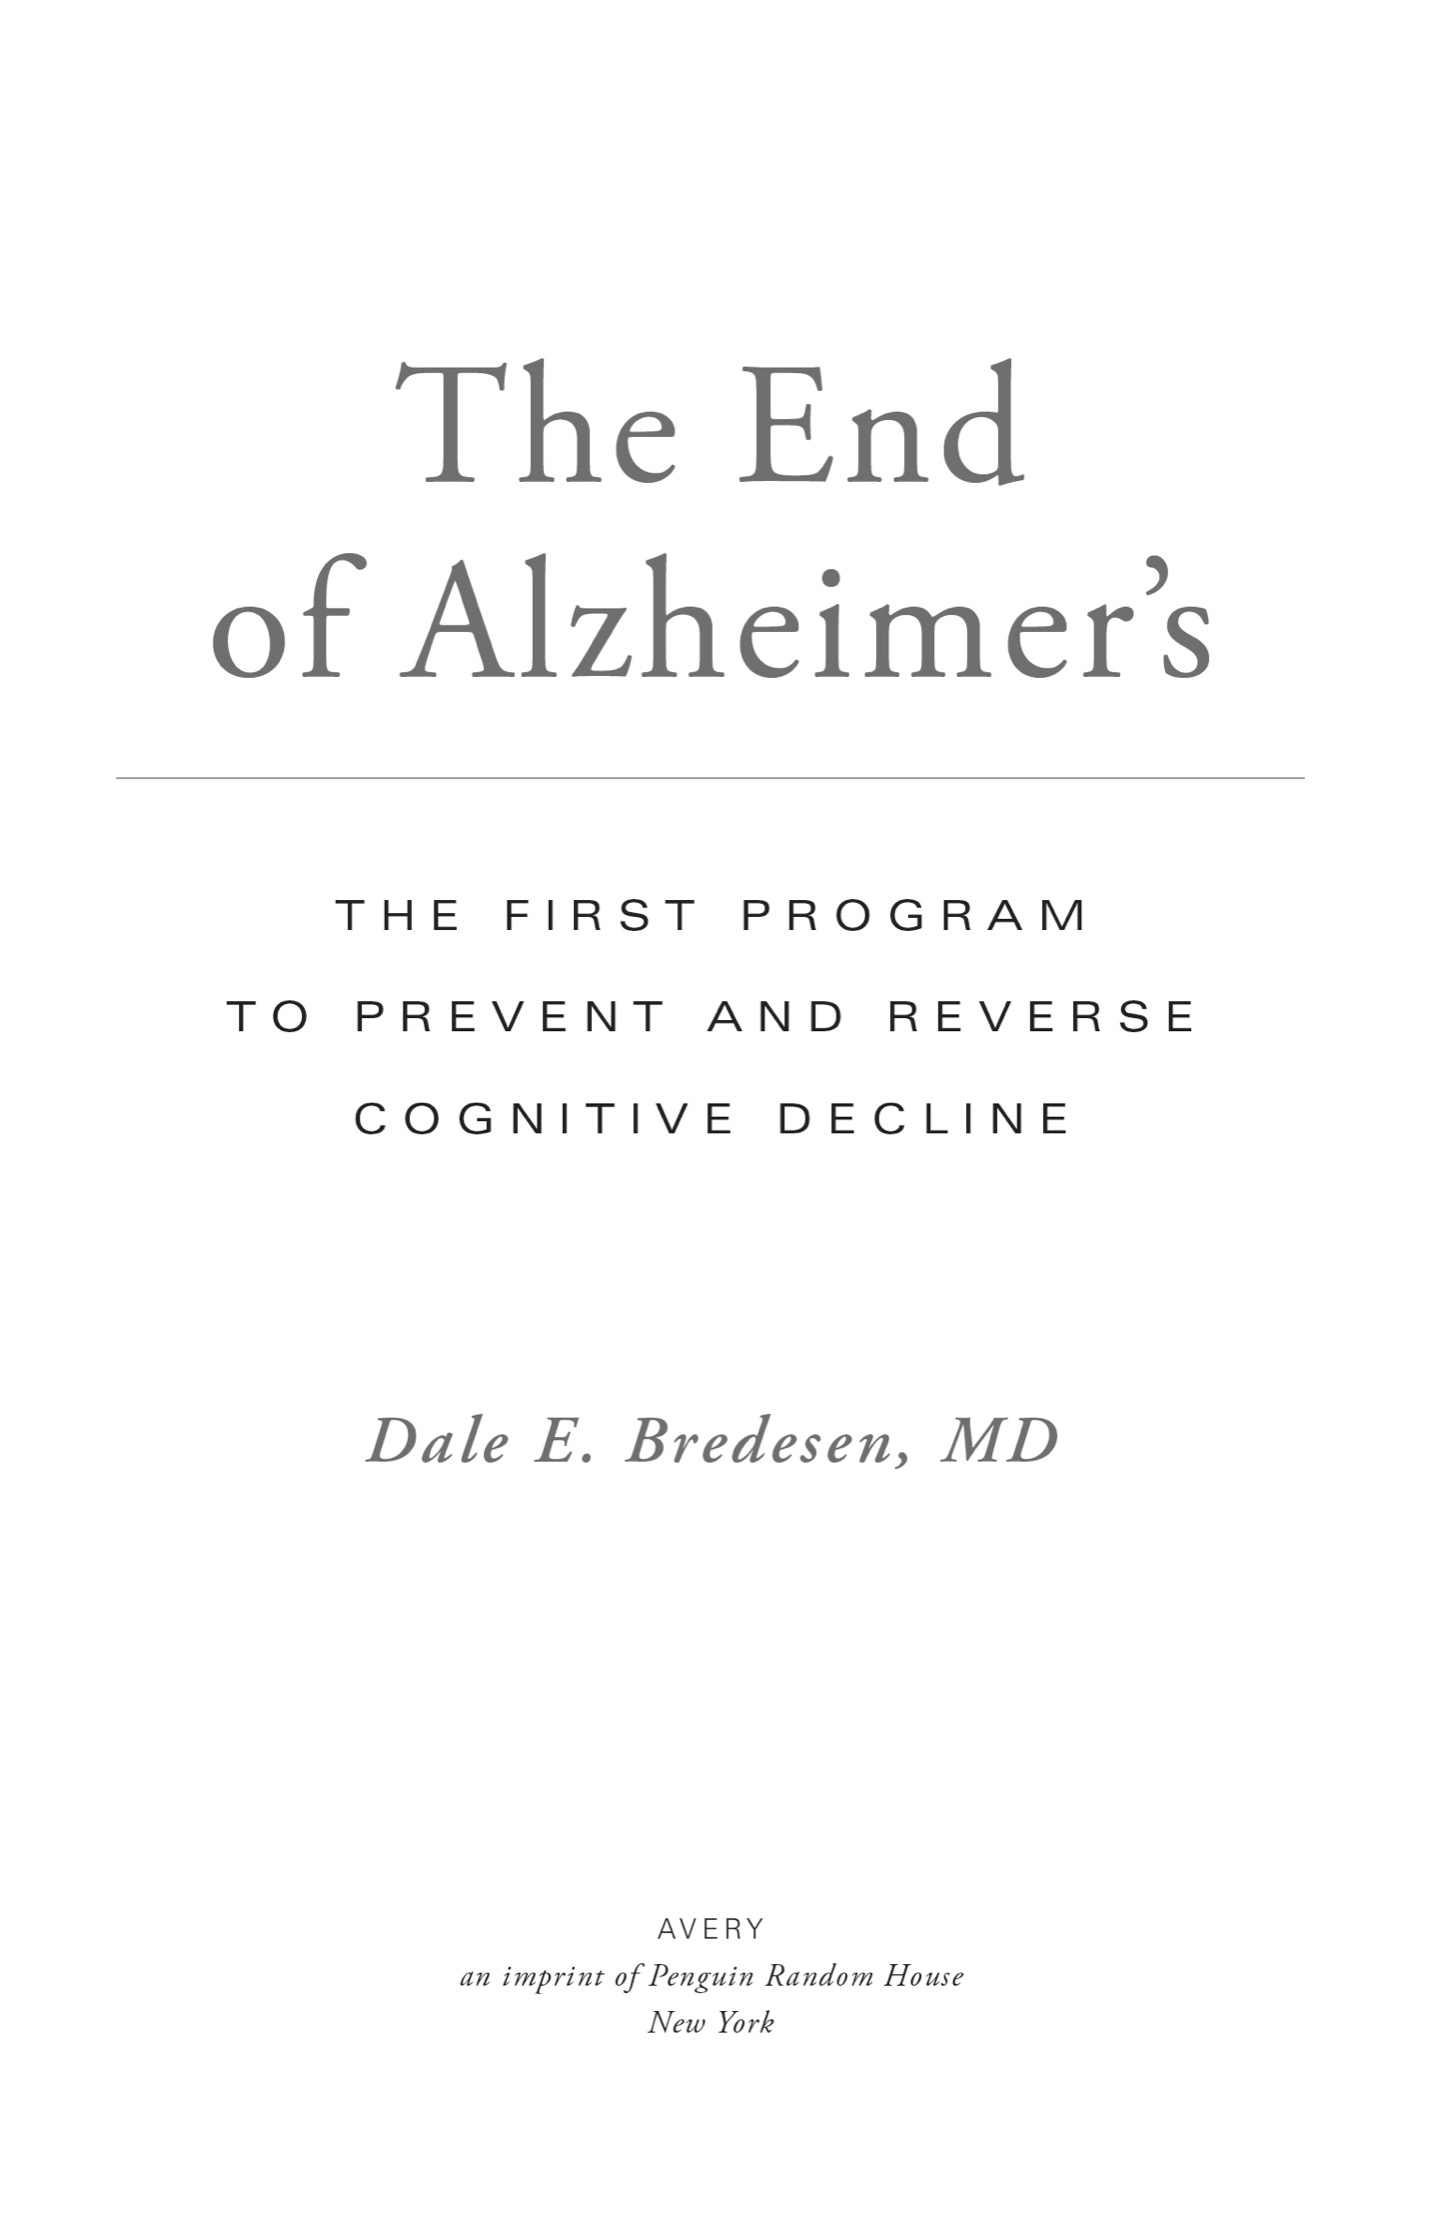 The End of Alzheimers The First Program to Prevent and Reverse the Cognitive Decline of Dementia - image 2